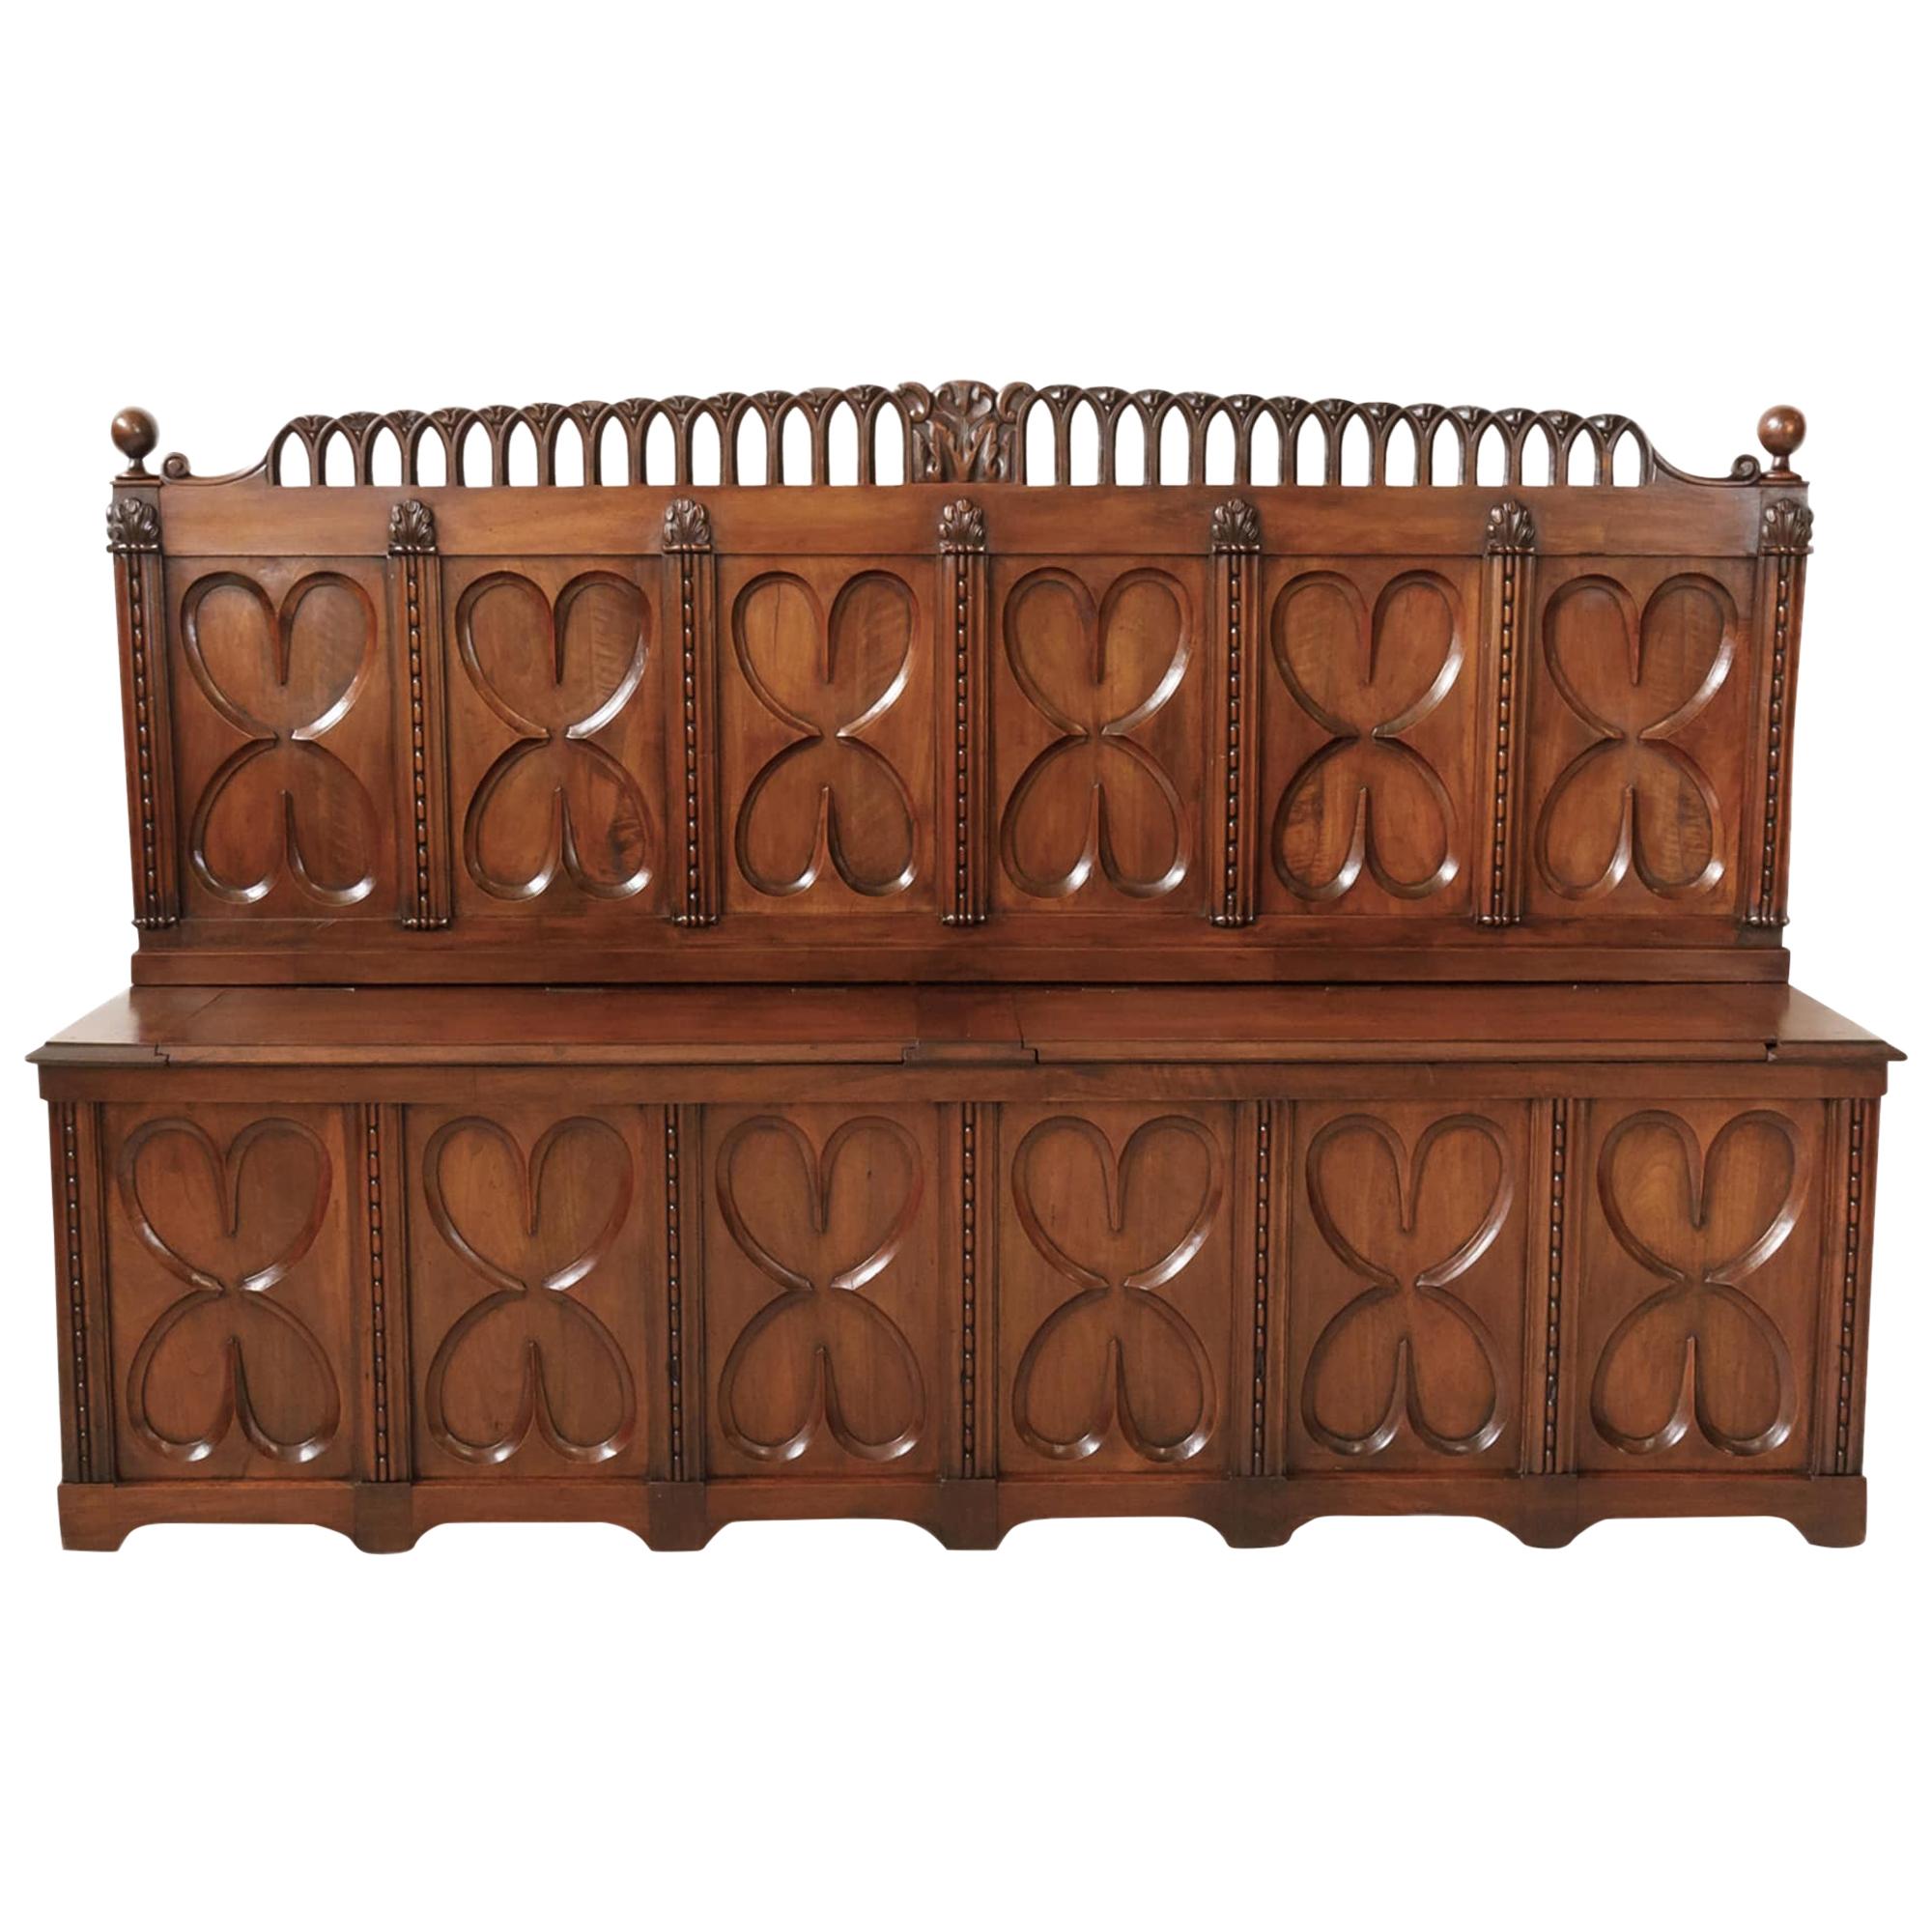 18th Century French Gothic Revival Period Walnut Settle or Hall Bench with Lift 